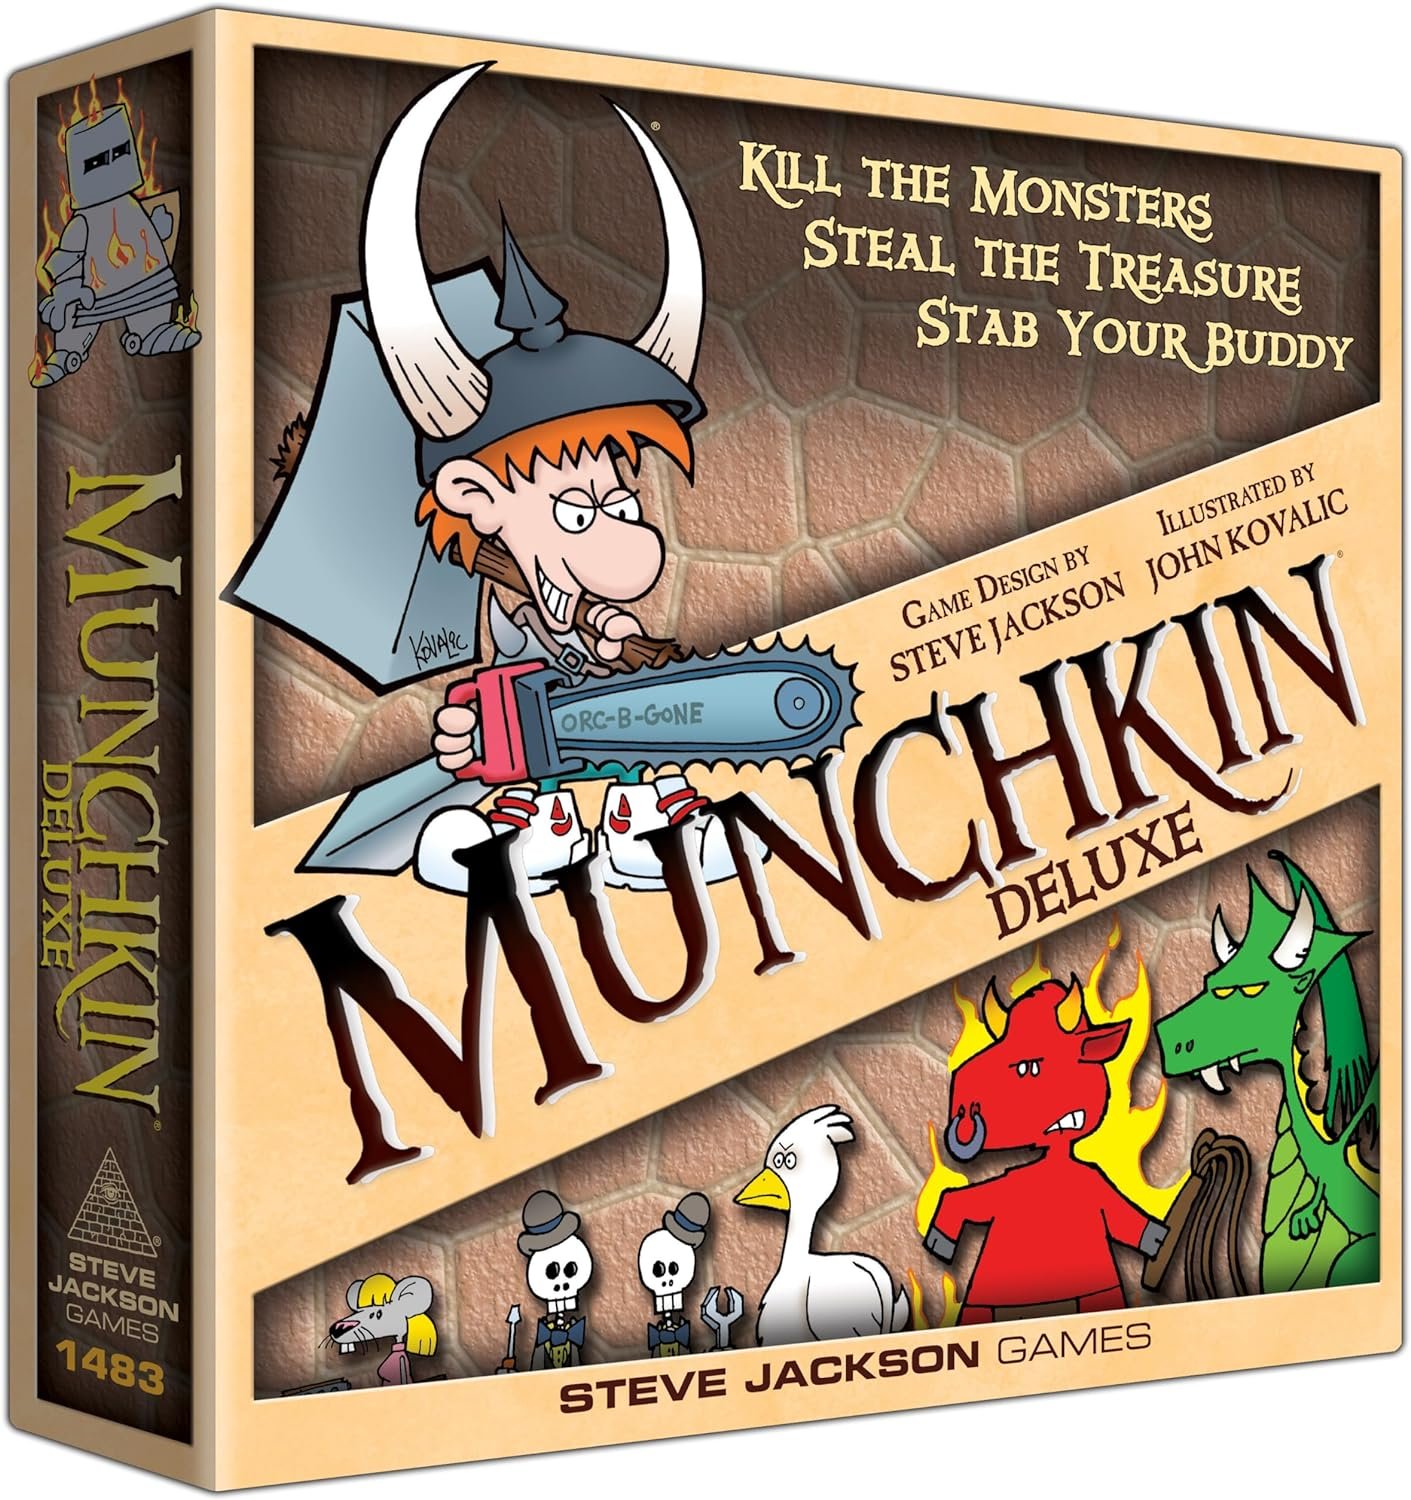 Munchkin Deluxe Board Game Review